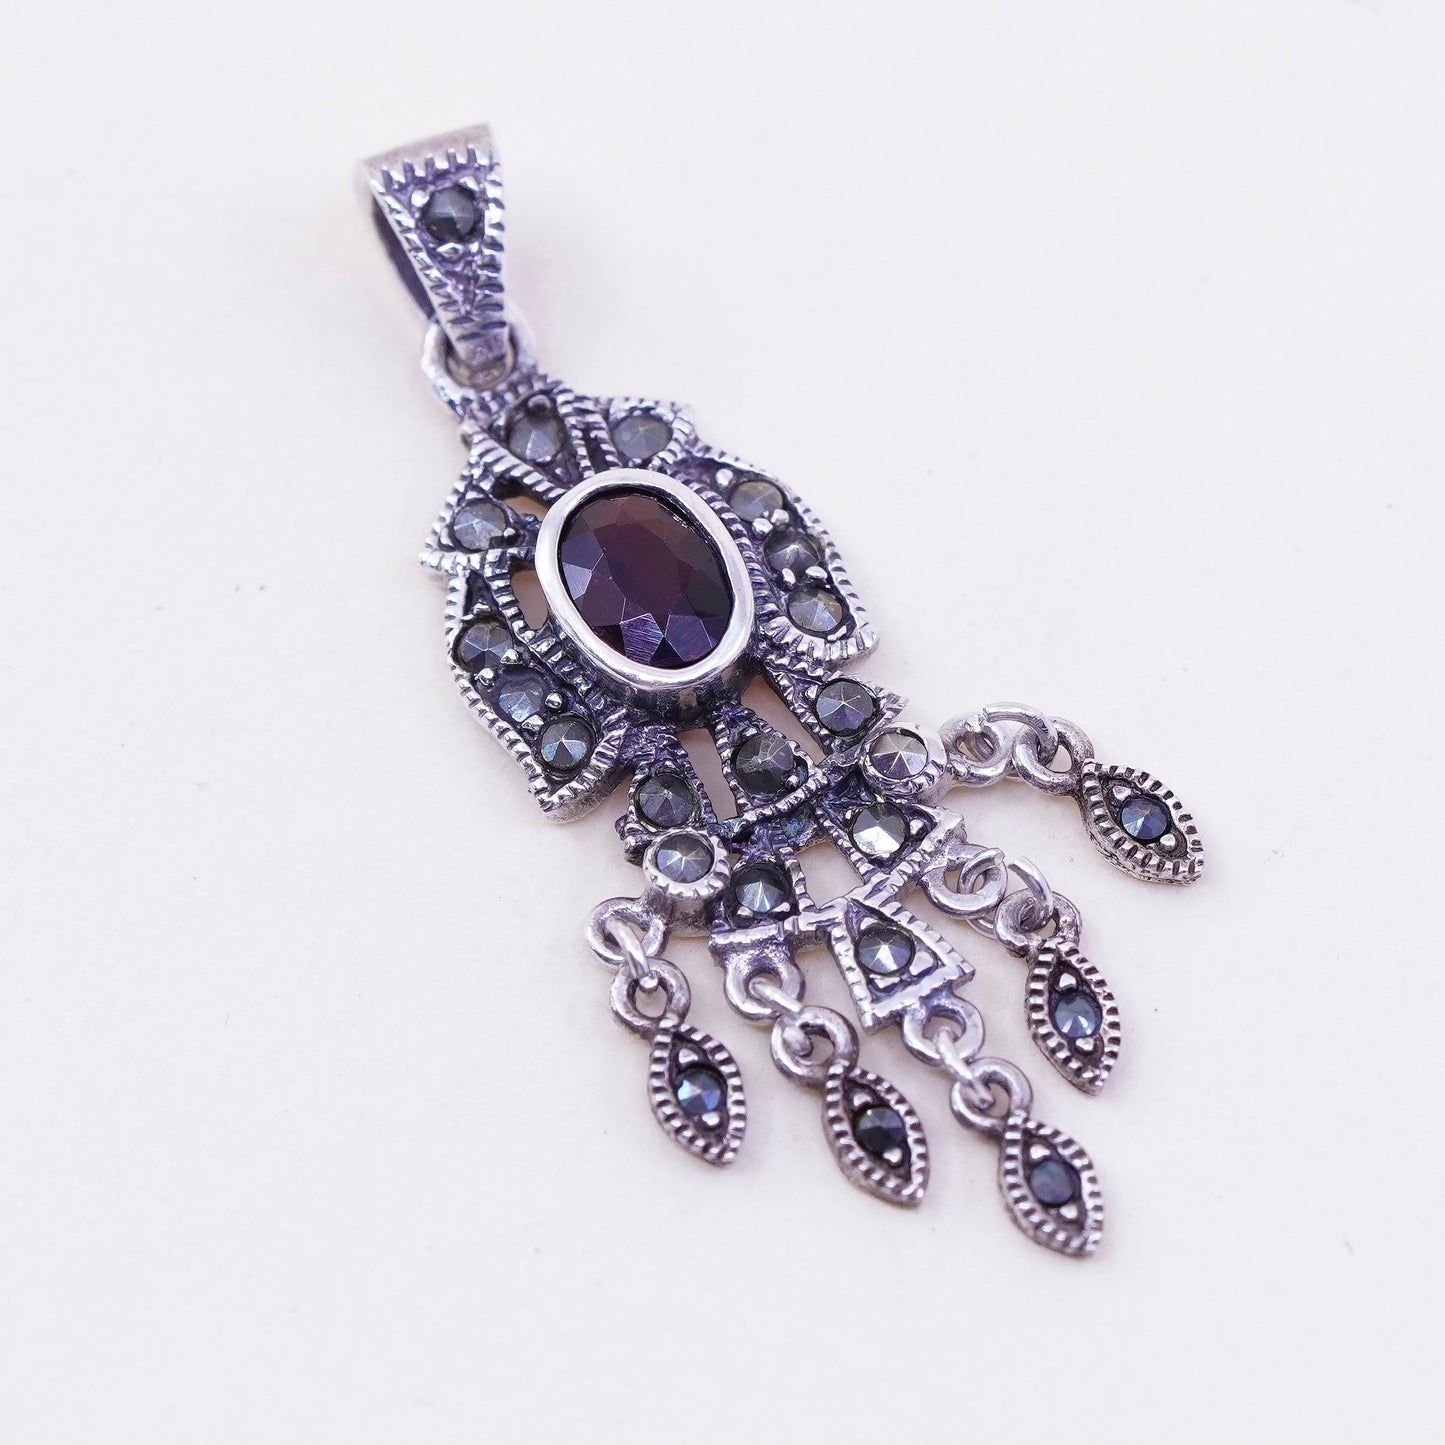 Vintage Sterling 925 silver handmade pendant with ruby and marcasite